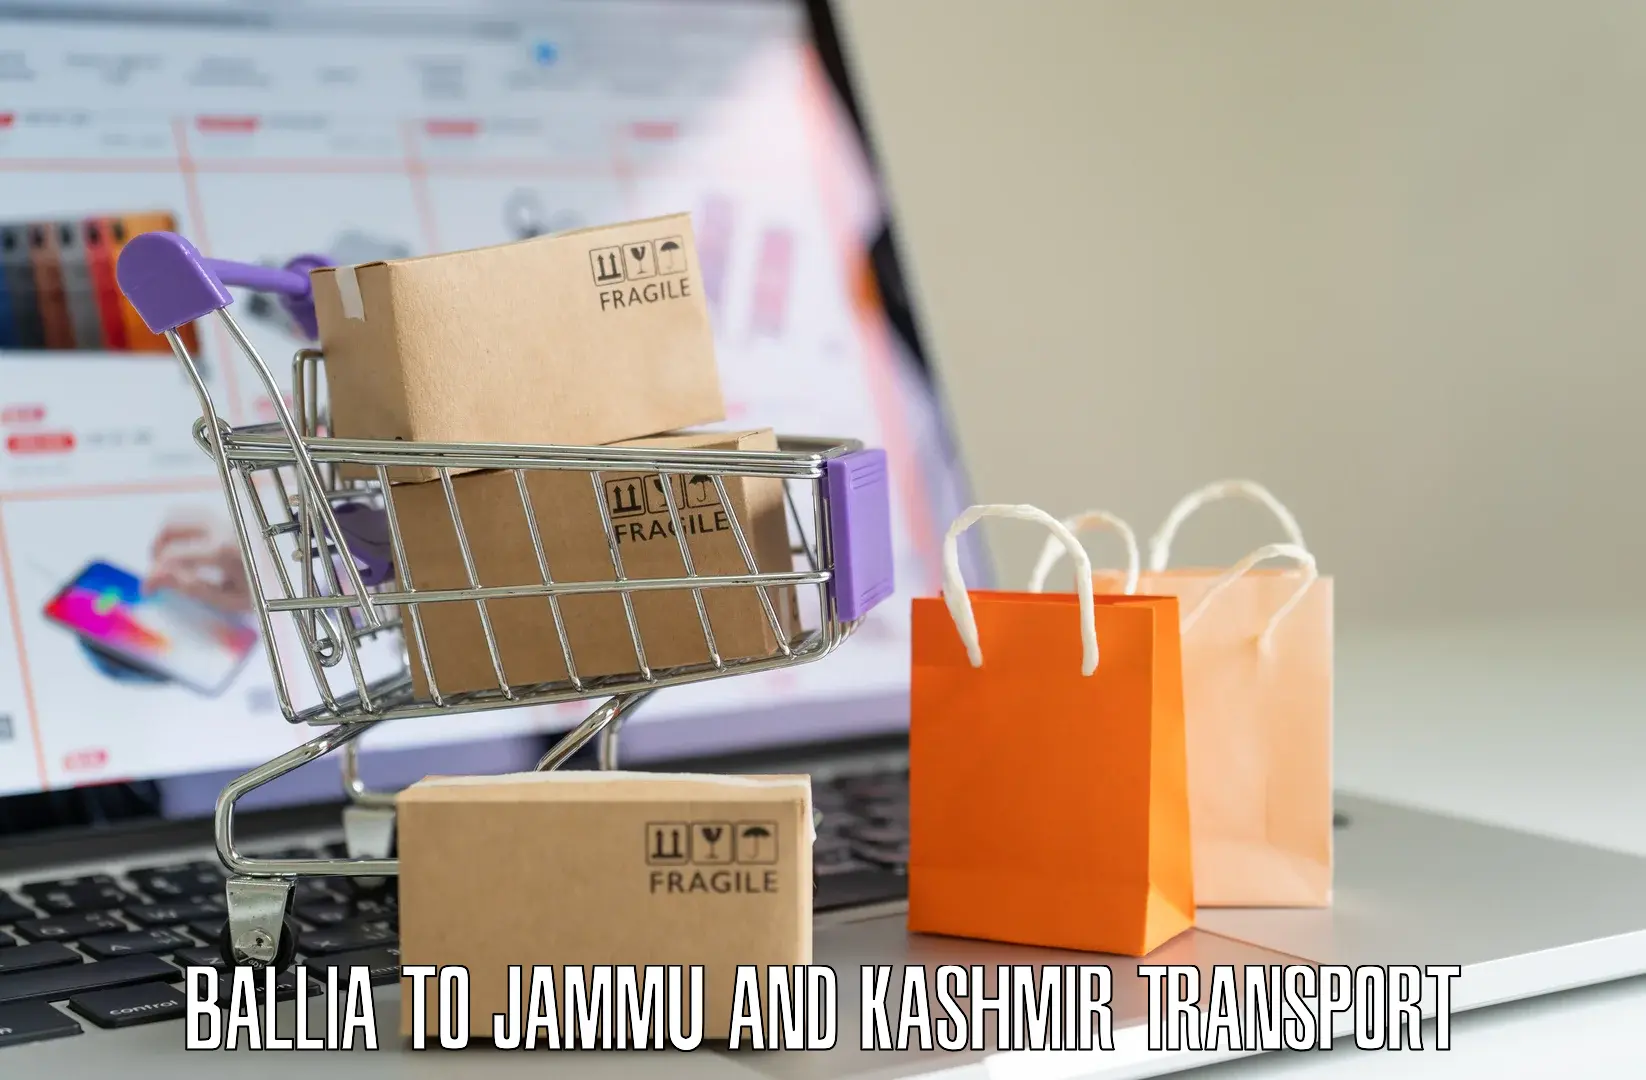 Goods delivery service Ballia to Jammu and Kashmir